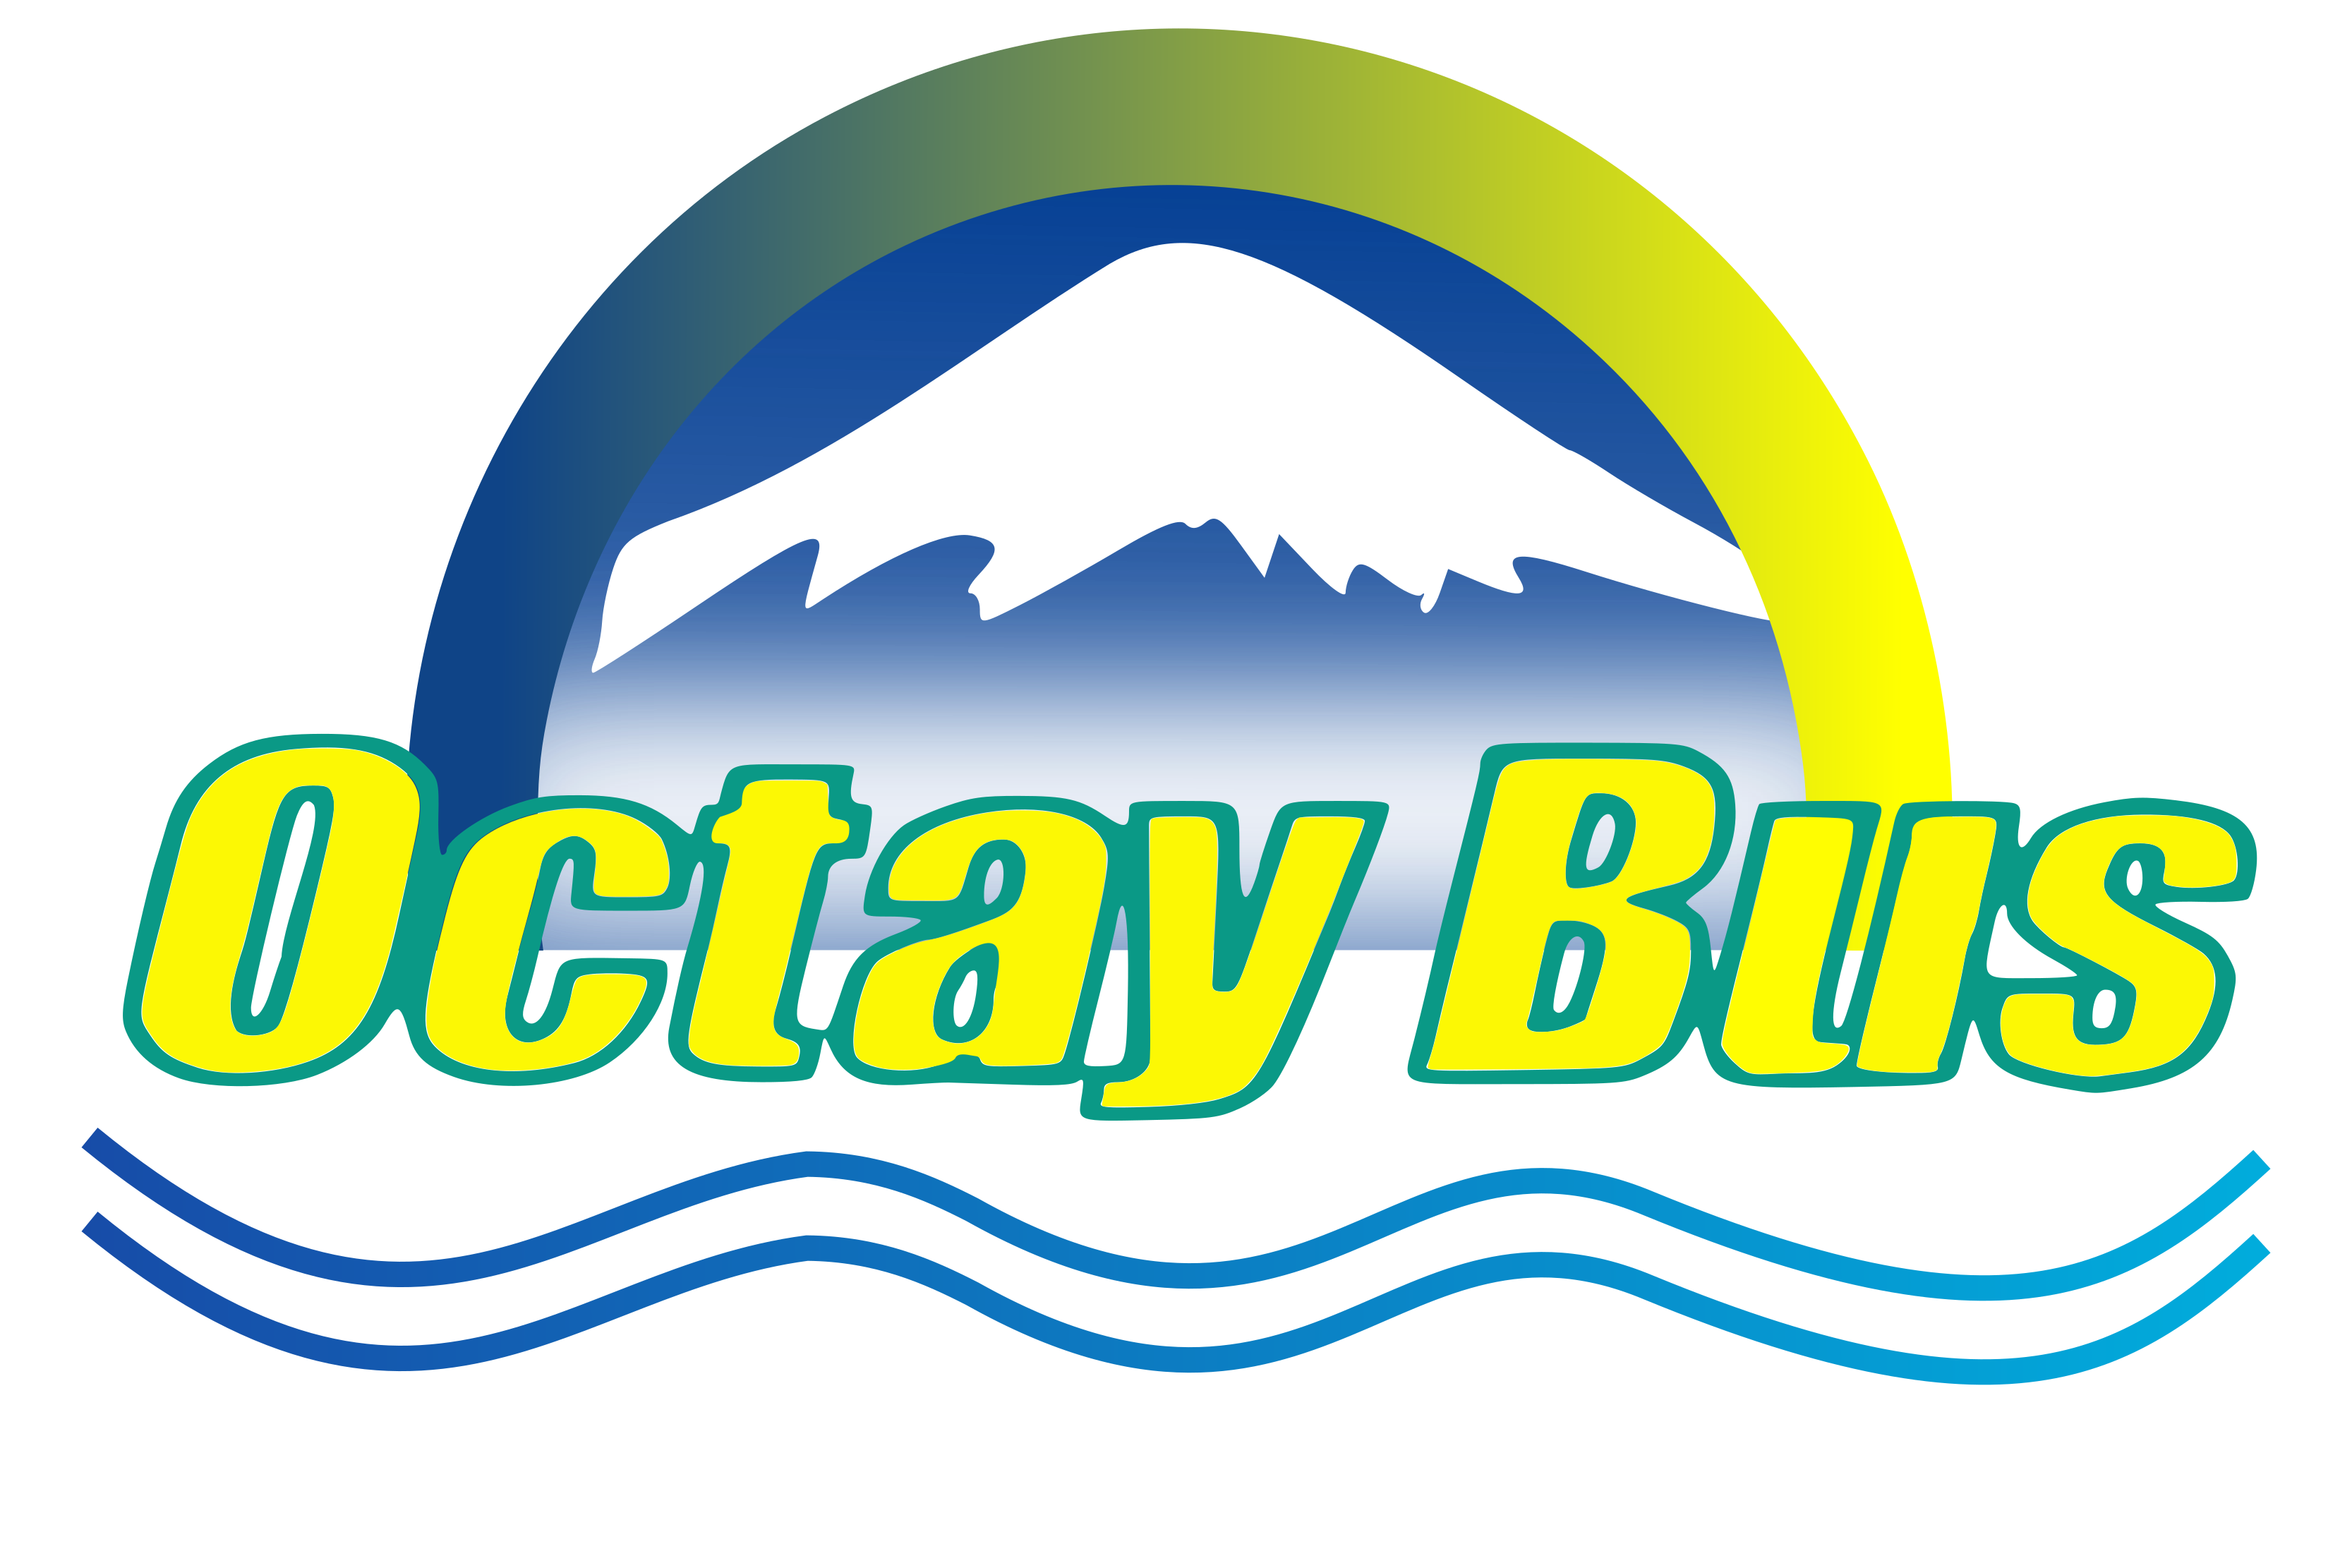 Octay Bus